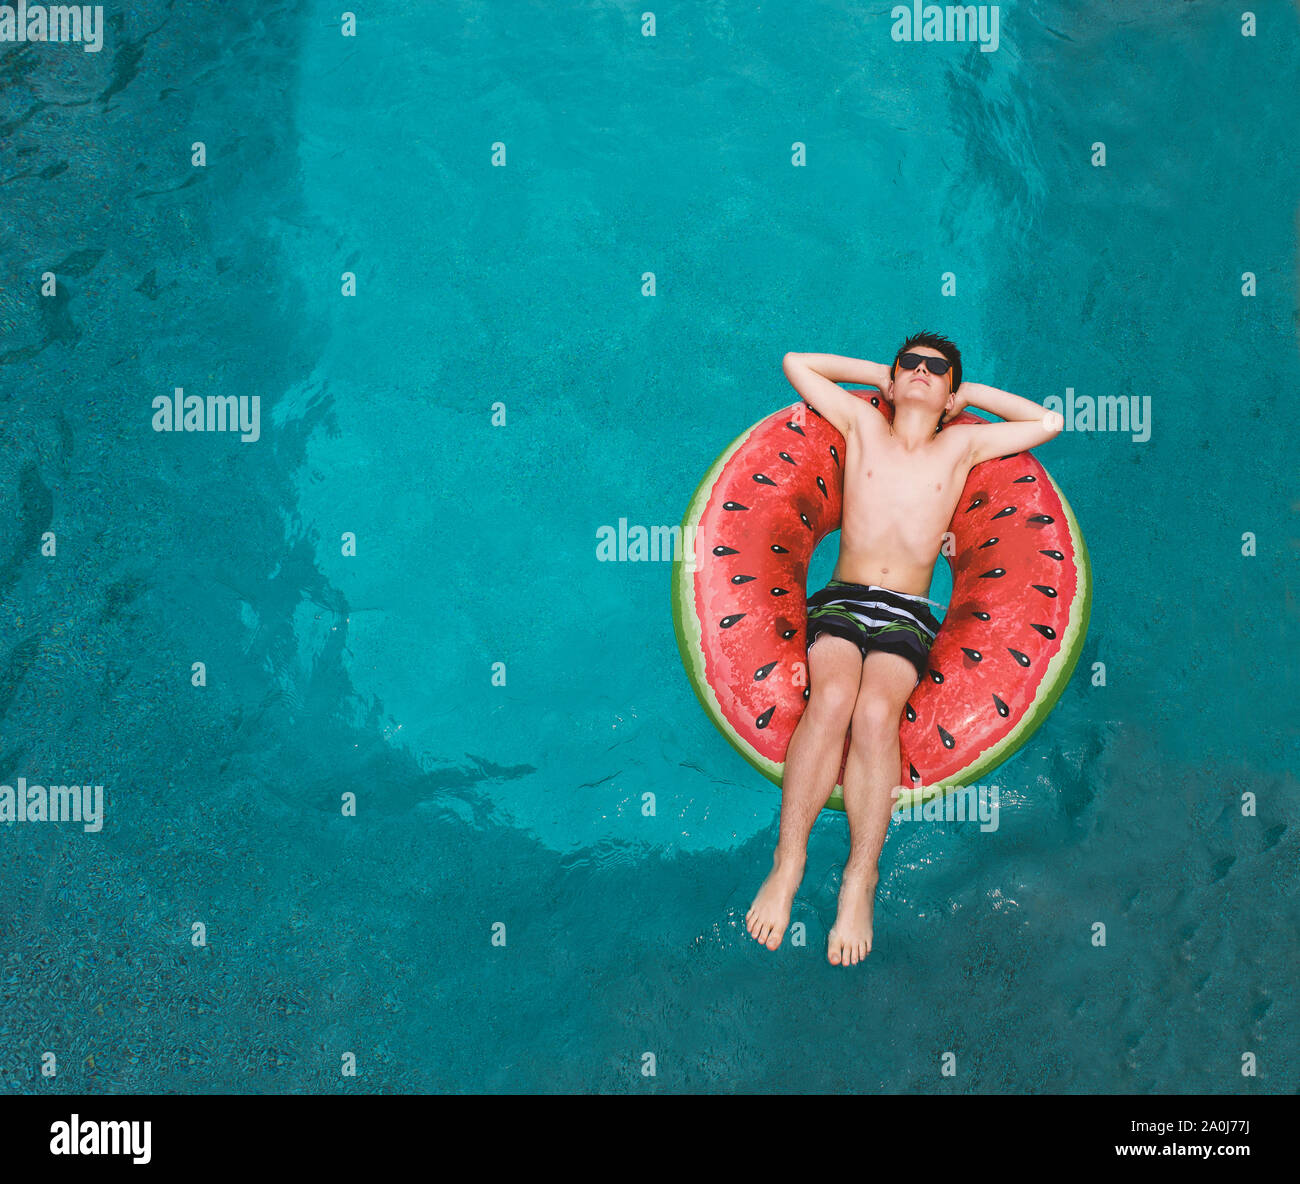 Top view of boy floating on inflatable watermelon float in a pool. Stock Photo